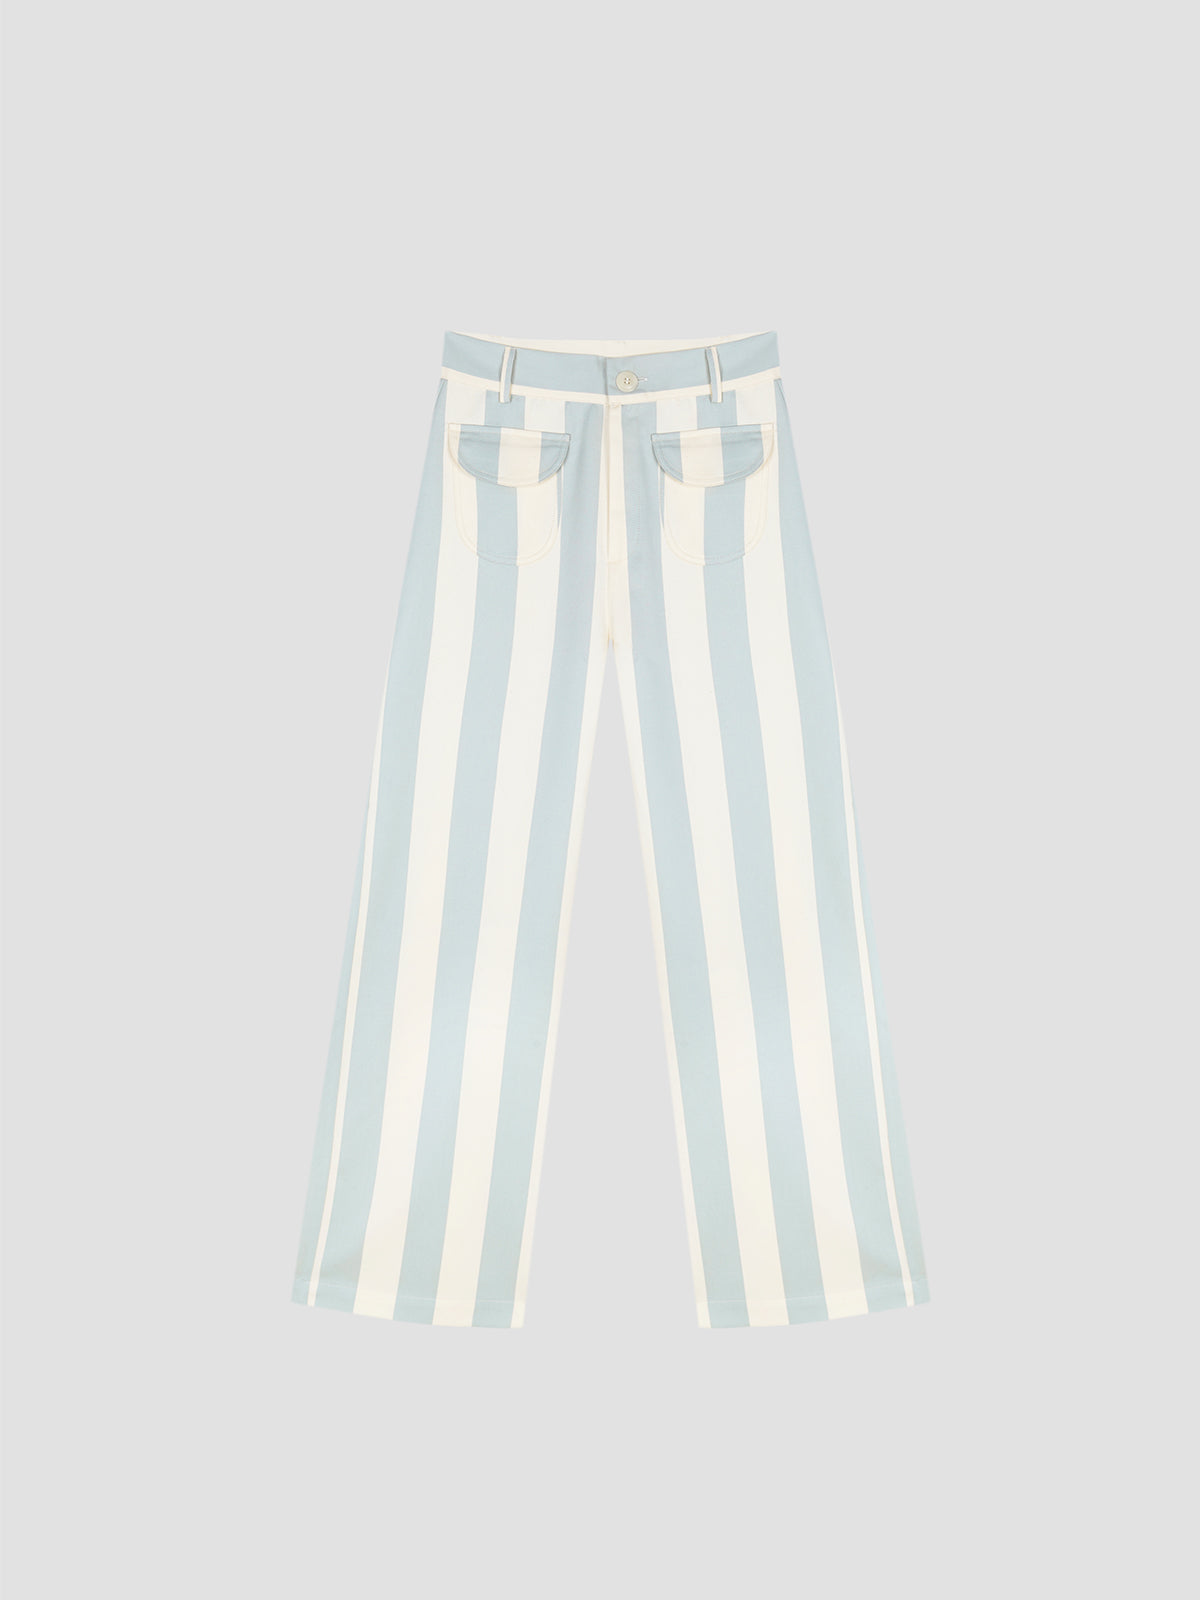 Parasol Pants Celeste is a high-waisted pant with front pockets and blue and white stripe print.